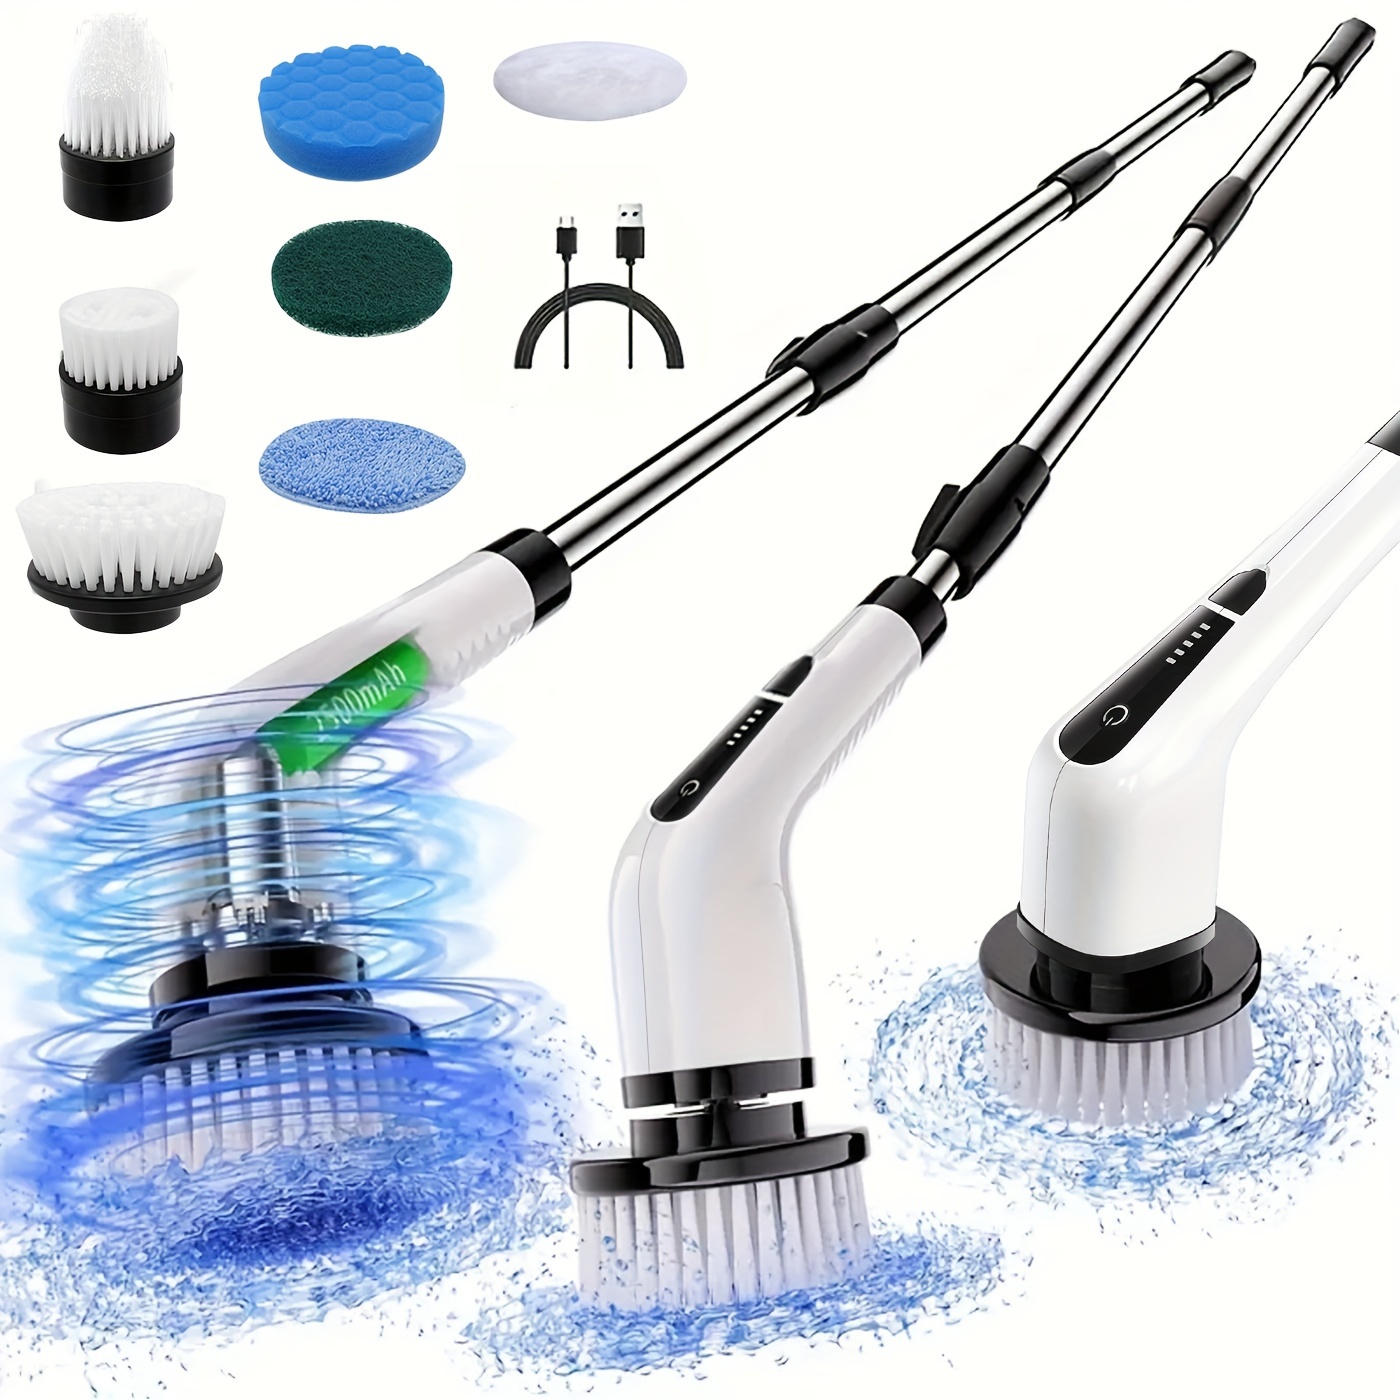 

Electric Rotary Scrubber Cordless Cleaning Brushes With Battery Level Indicator, 7 Interchangeable Brush Heads, Double Speed And Detachable Telescopic Handle For Kitchen, Living Room And Bathrooms